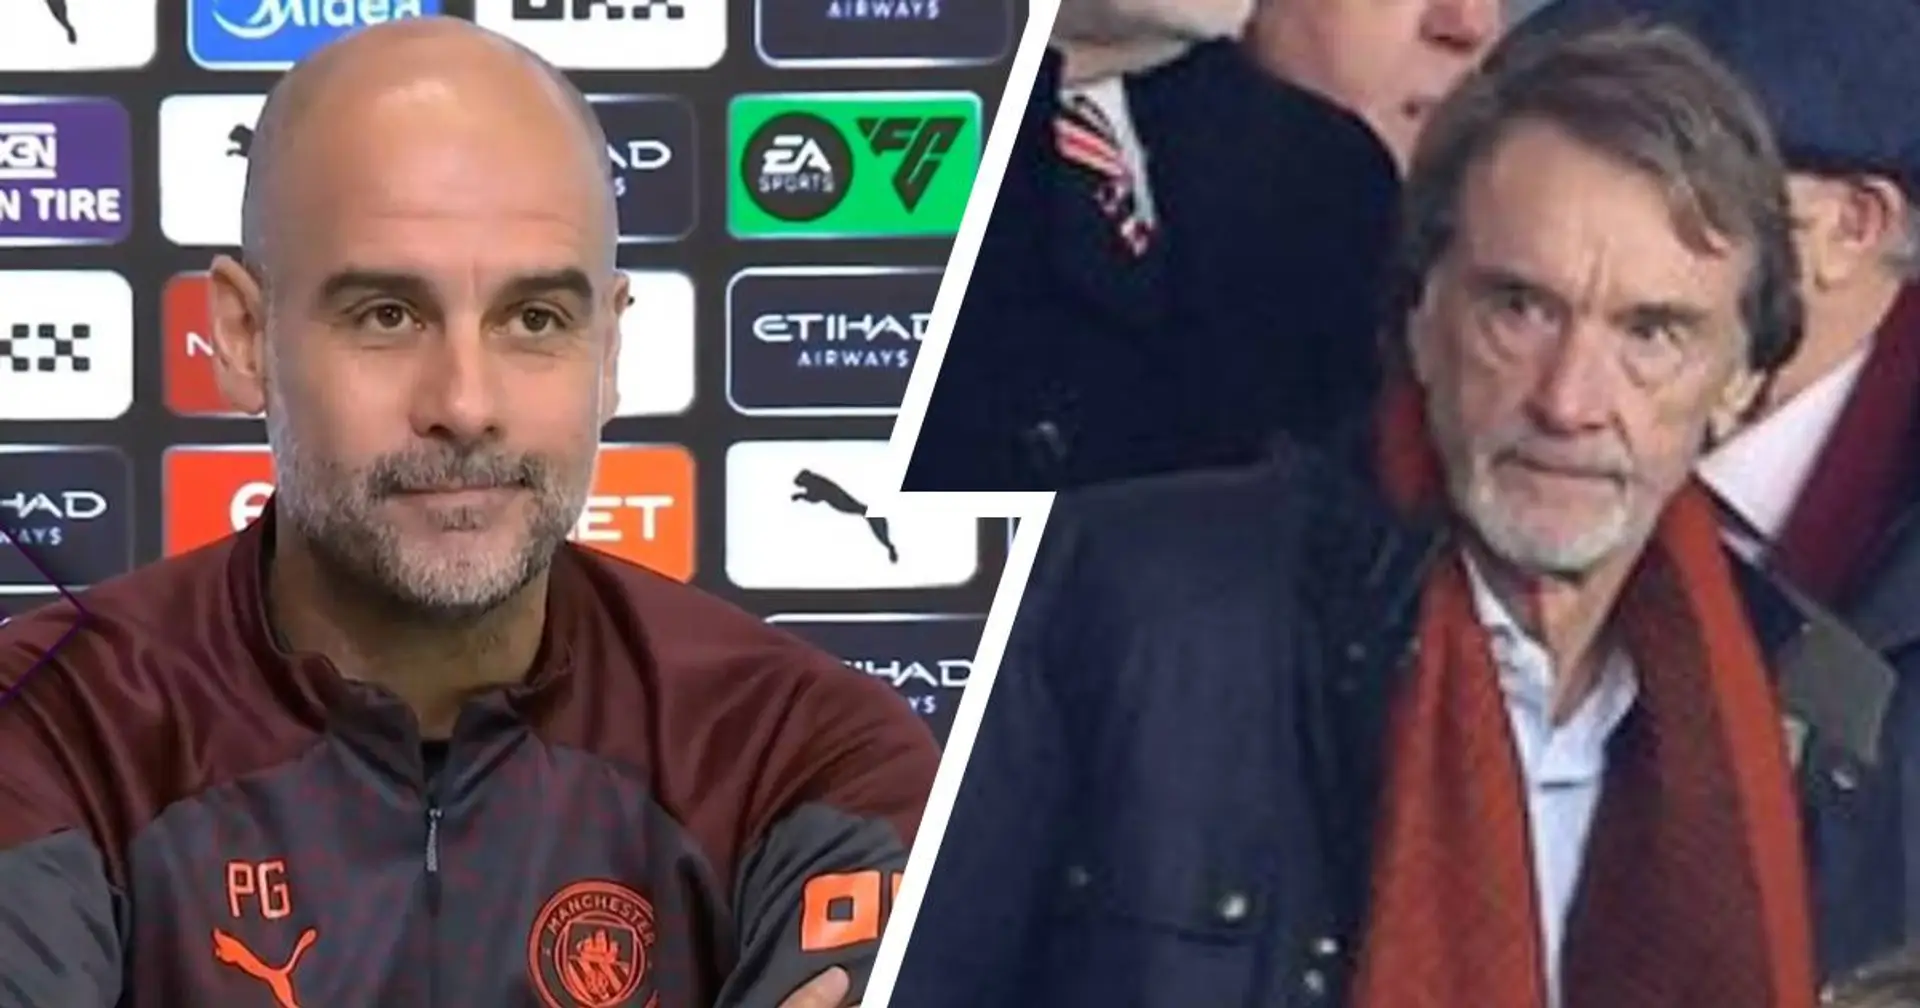 'They admit it': Smug Pep Guardiola reacts to Ratcliffe emulating Man City model for Man United